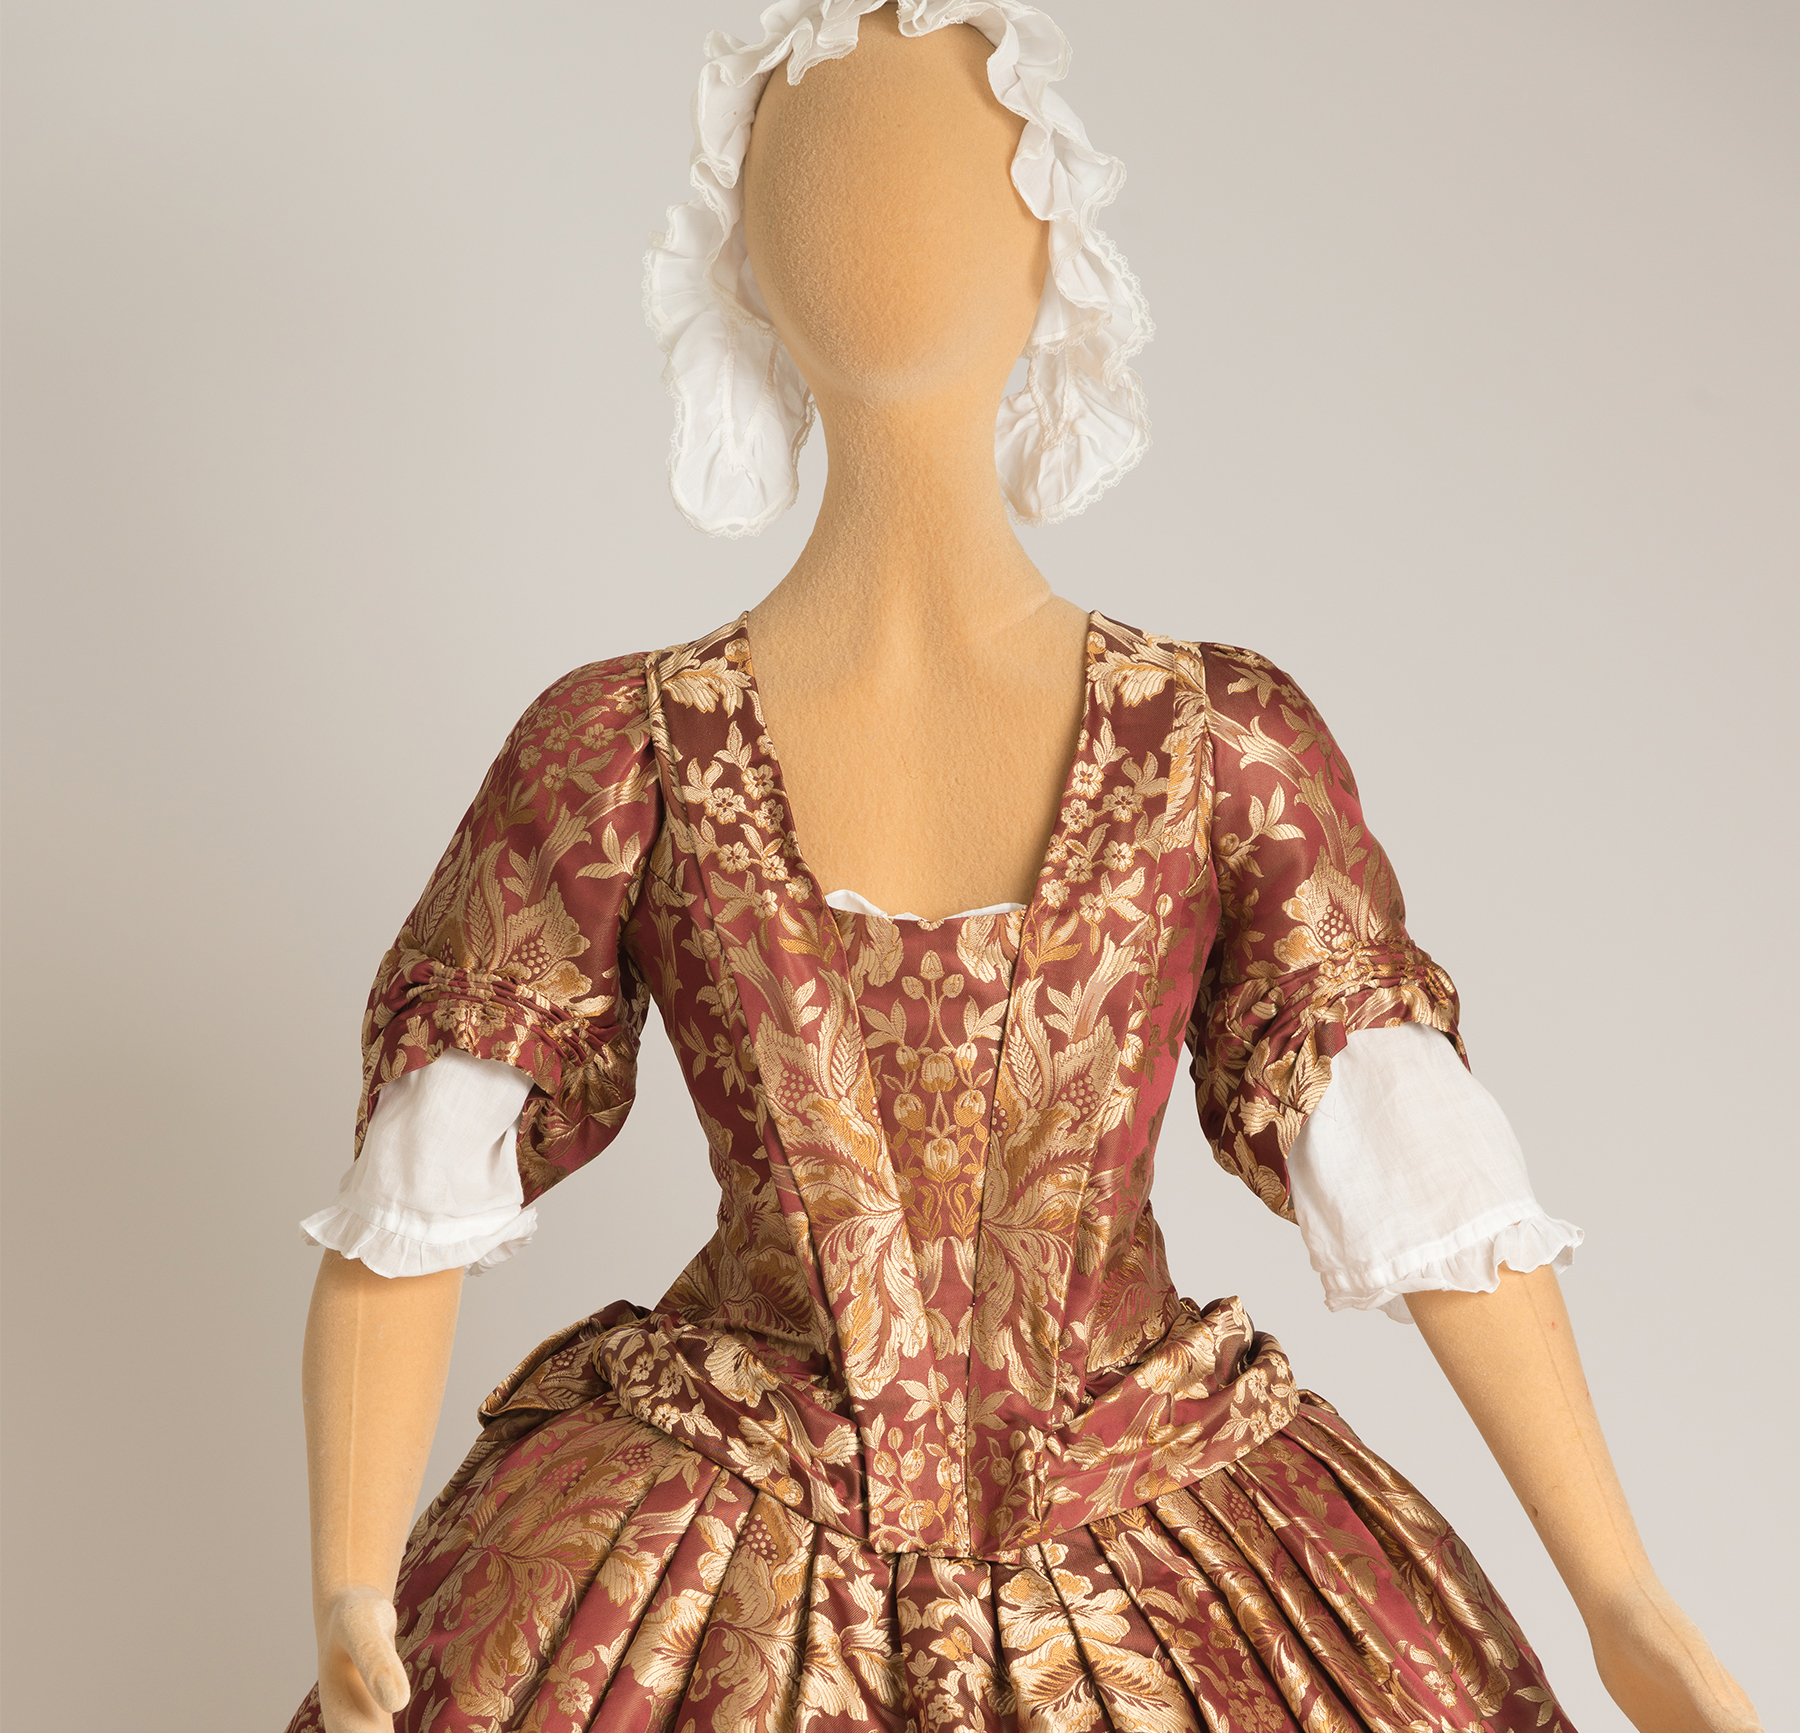 18th century sewing online courses - 1730s sewing